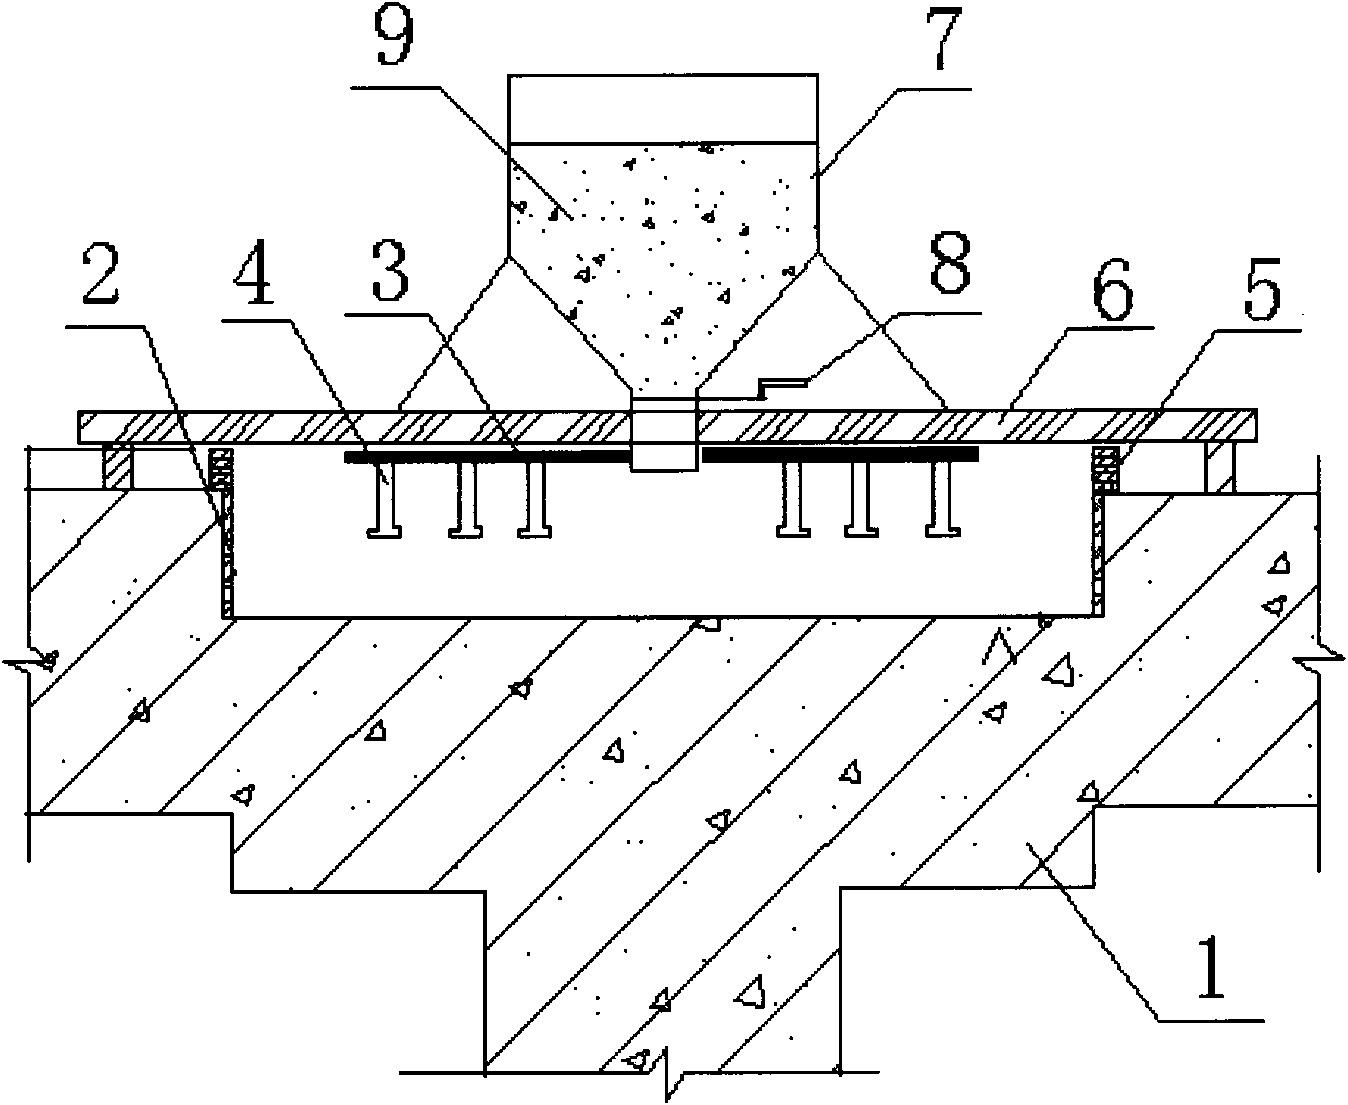 Construction process for installing elastic slippage shock isolation support